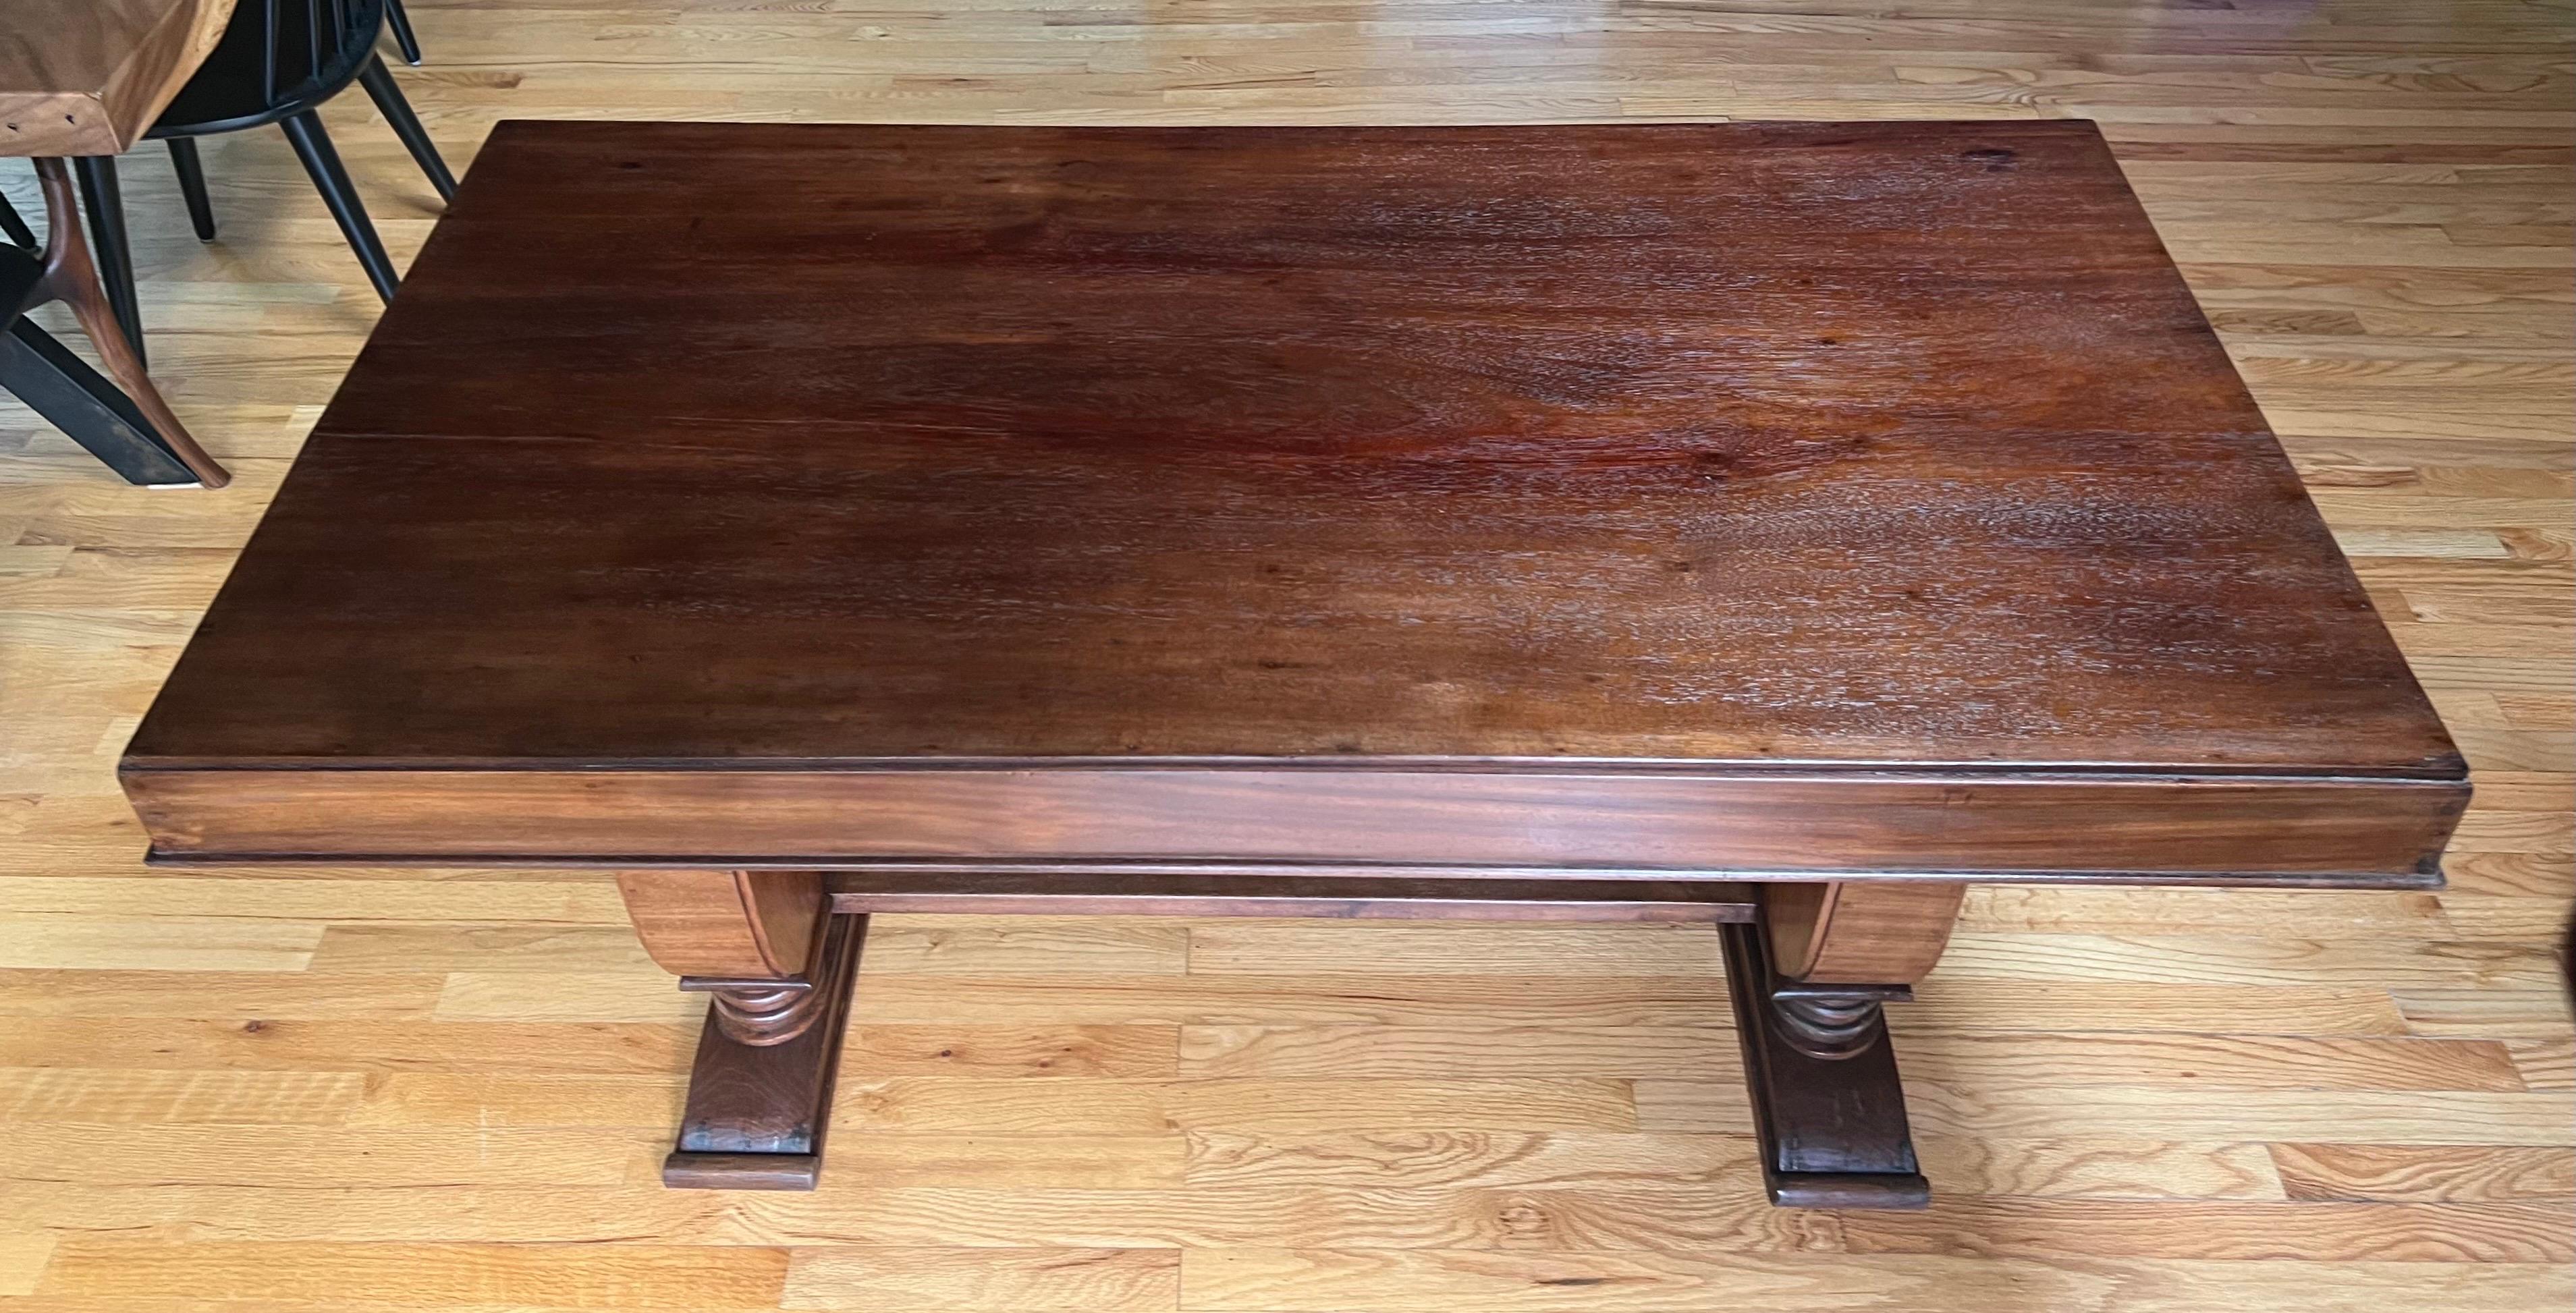 Rare French Art Deco Writing Table / Desk in Teak c. 1925, style of Andre Groult For Sale 3